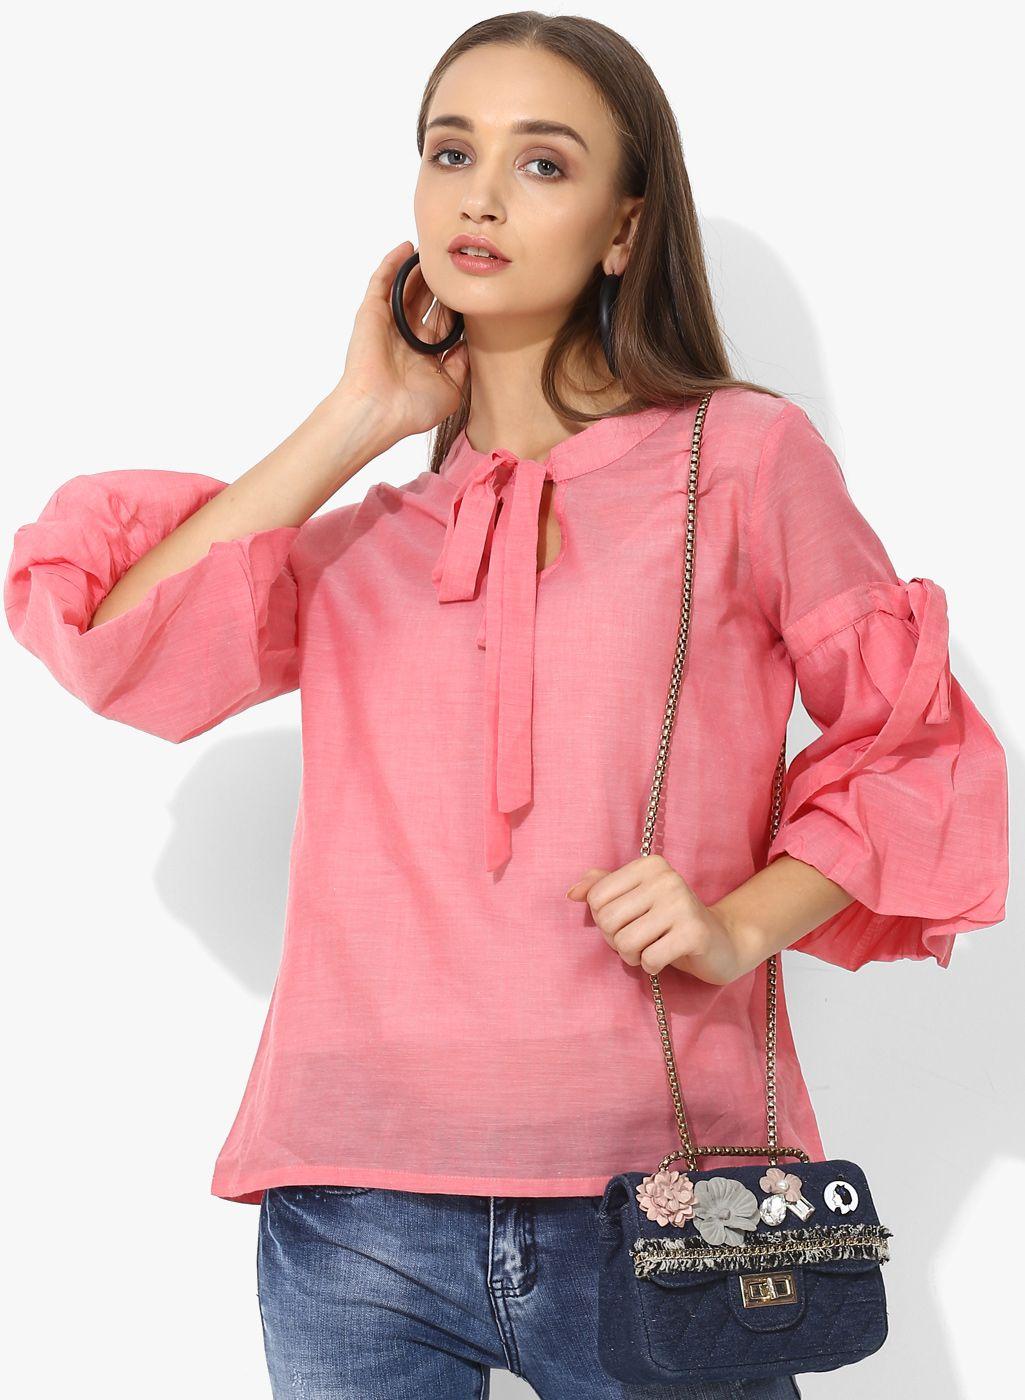 miaminx-women-coral-pink-sheer-puff-sleeves-solid-top